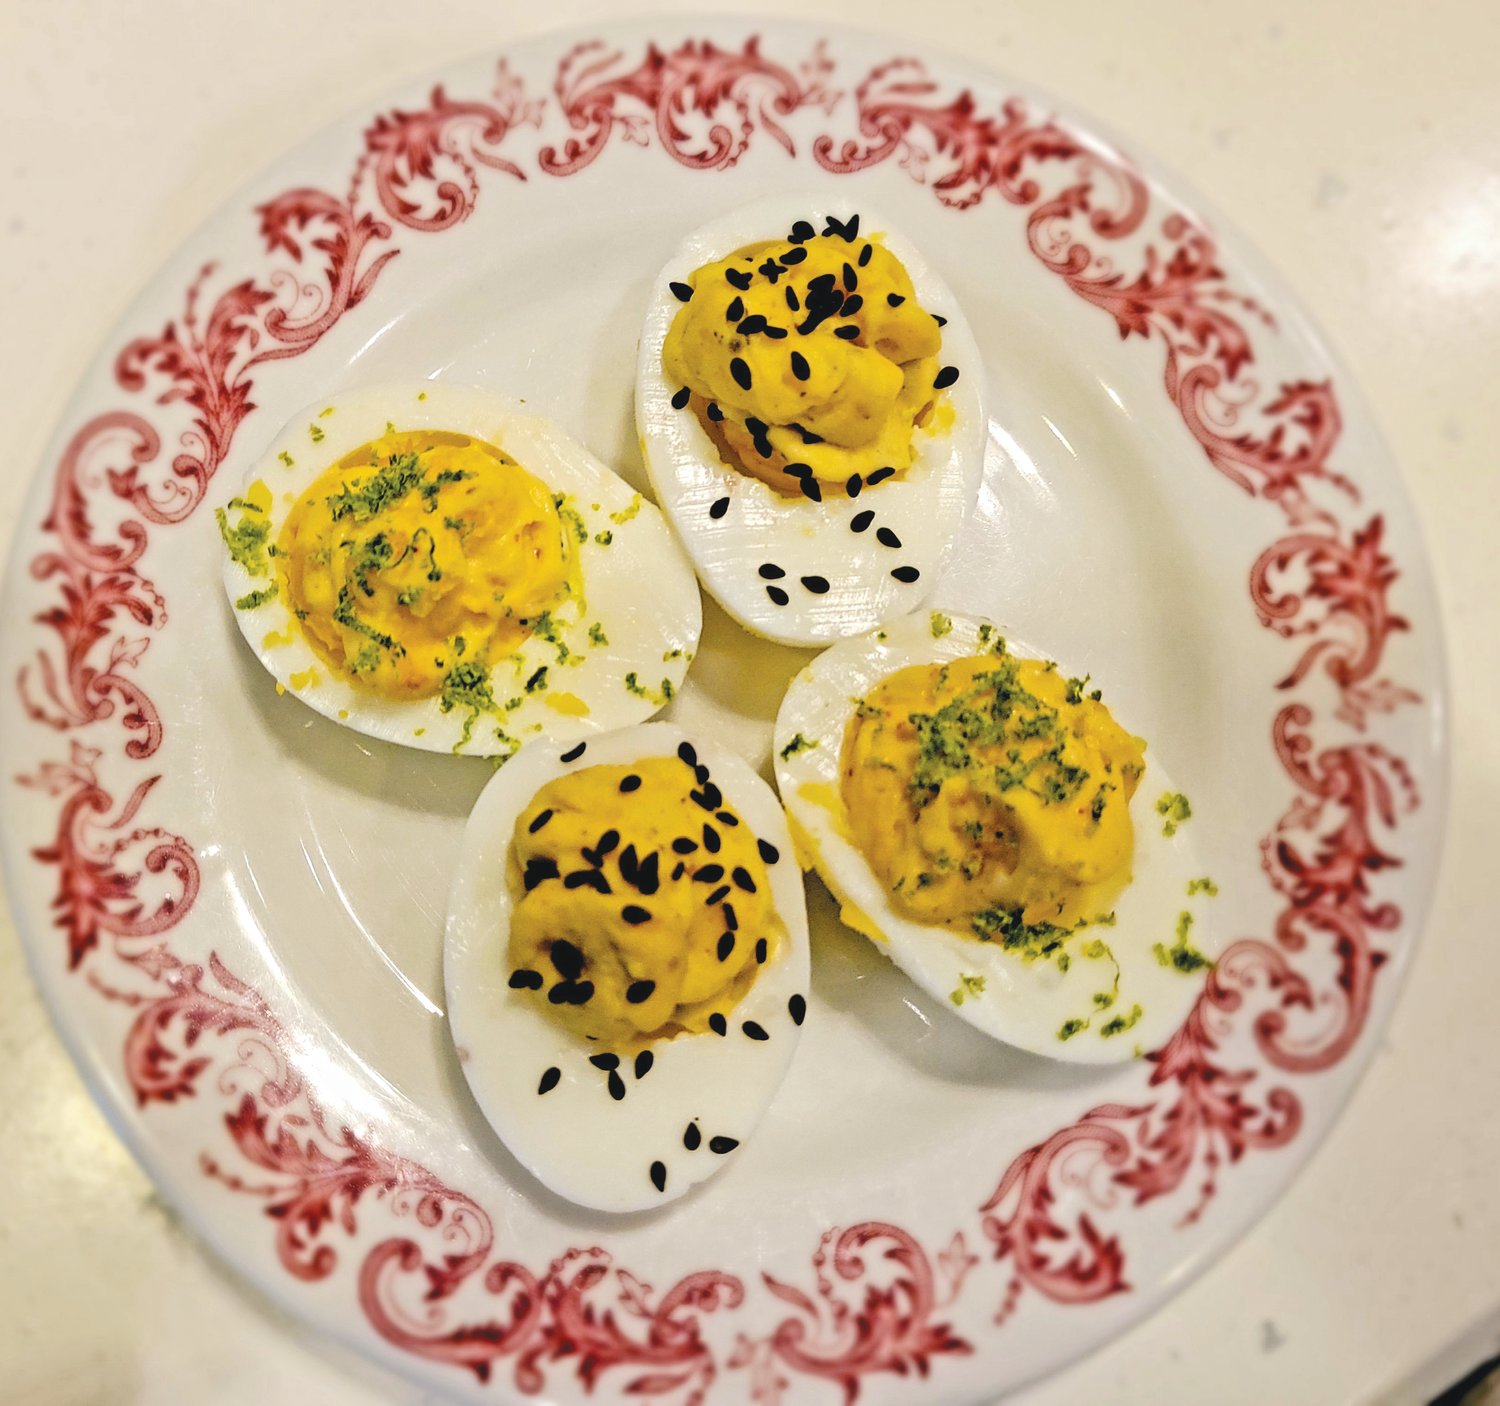 Two styles of deviled eggs.